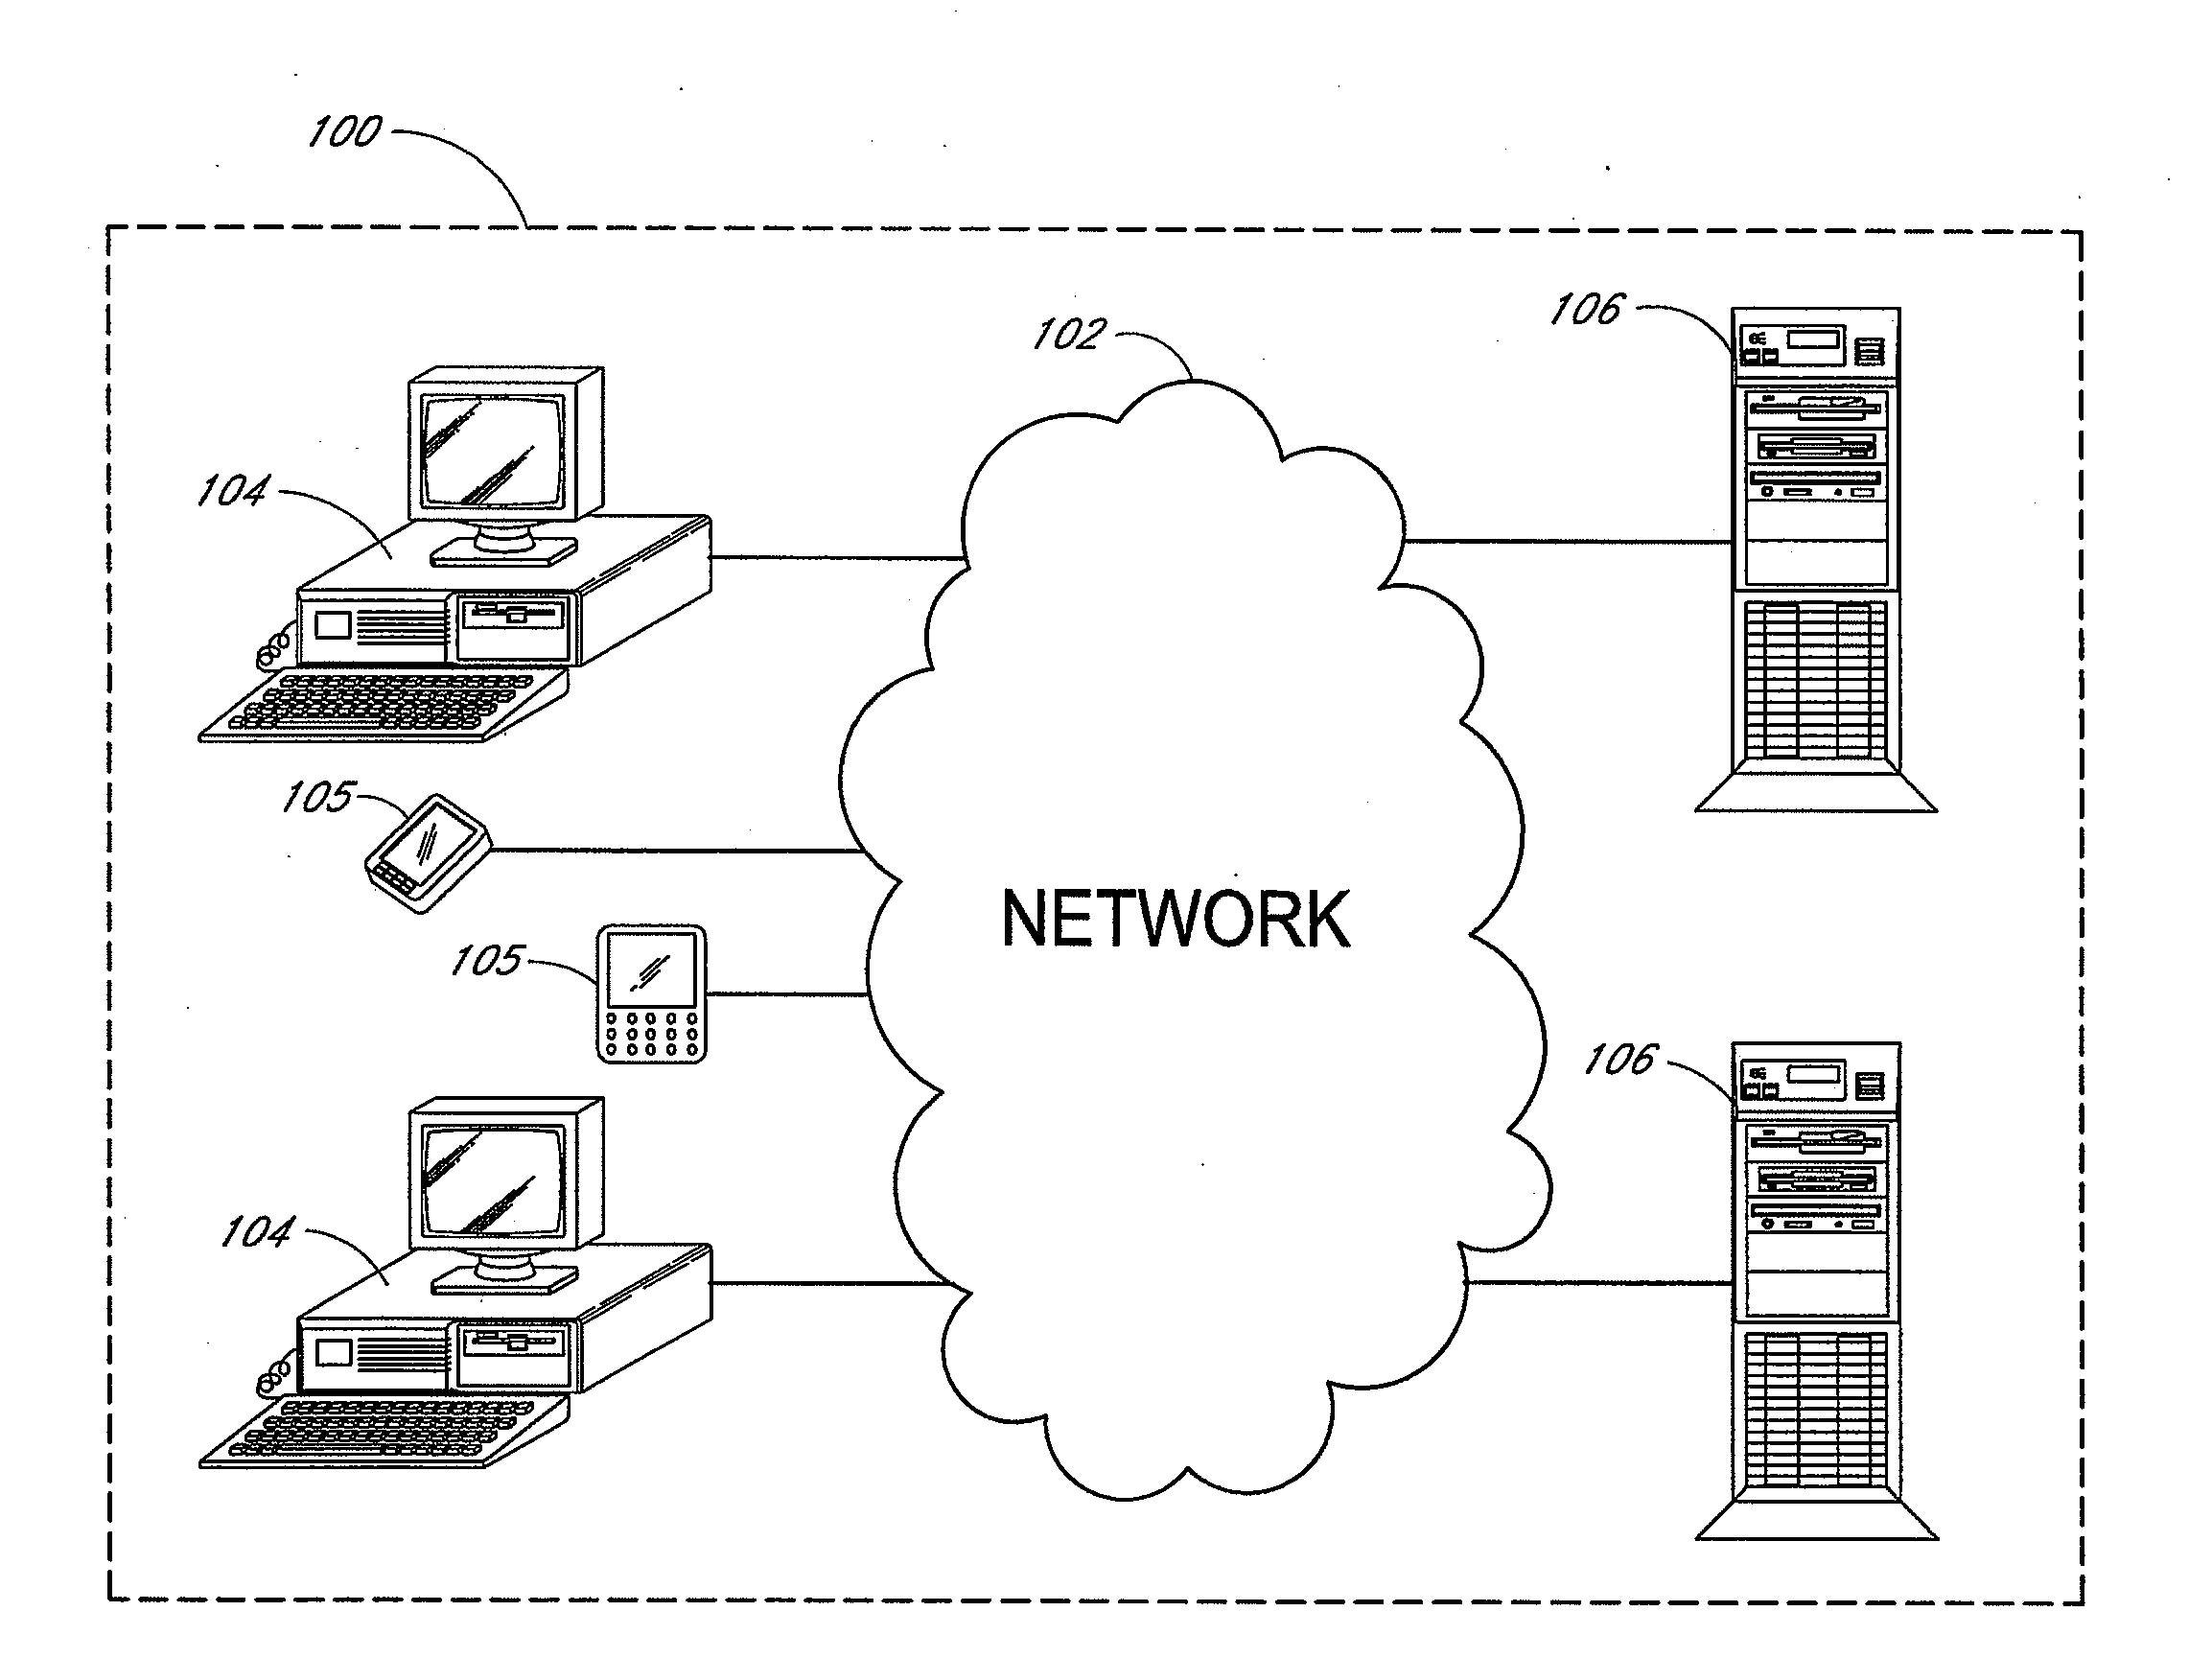 System and method for using a mobile electronic device to optimize an energy management system